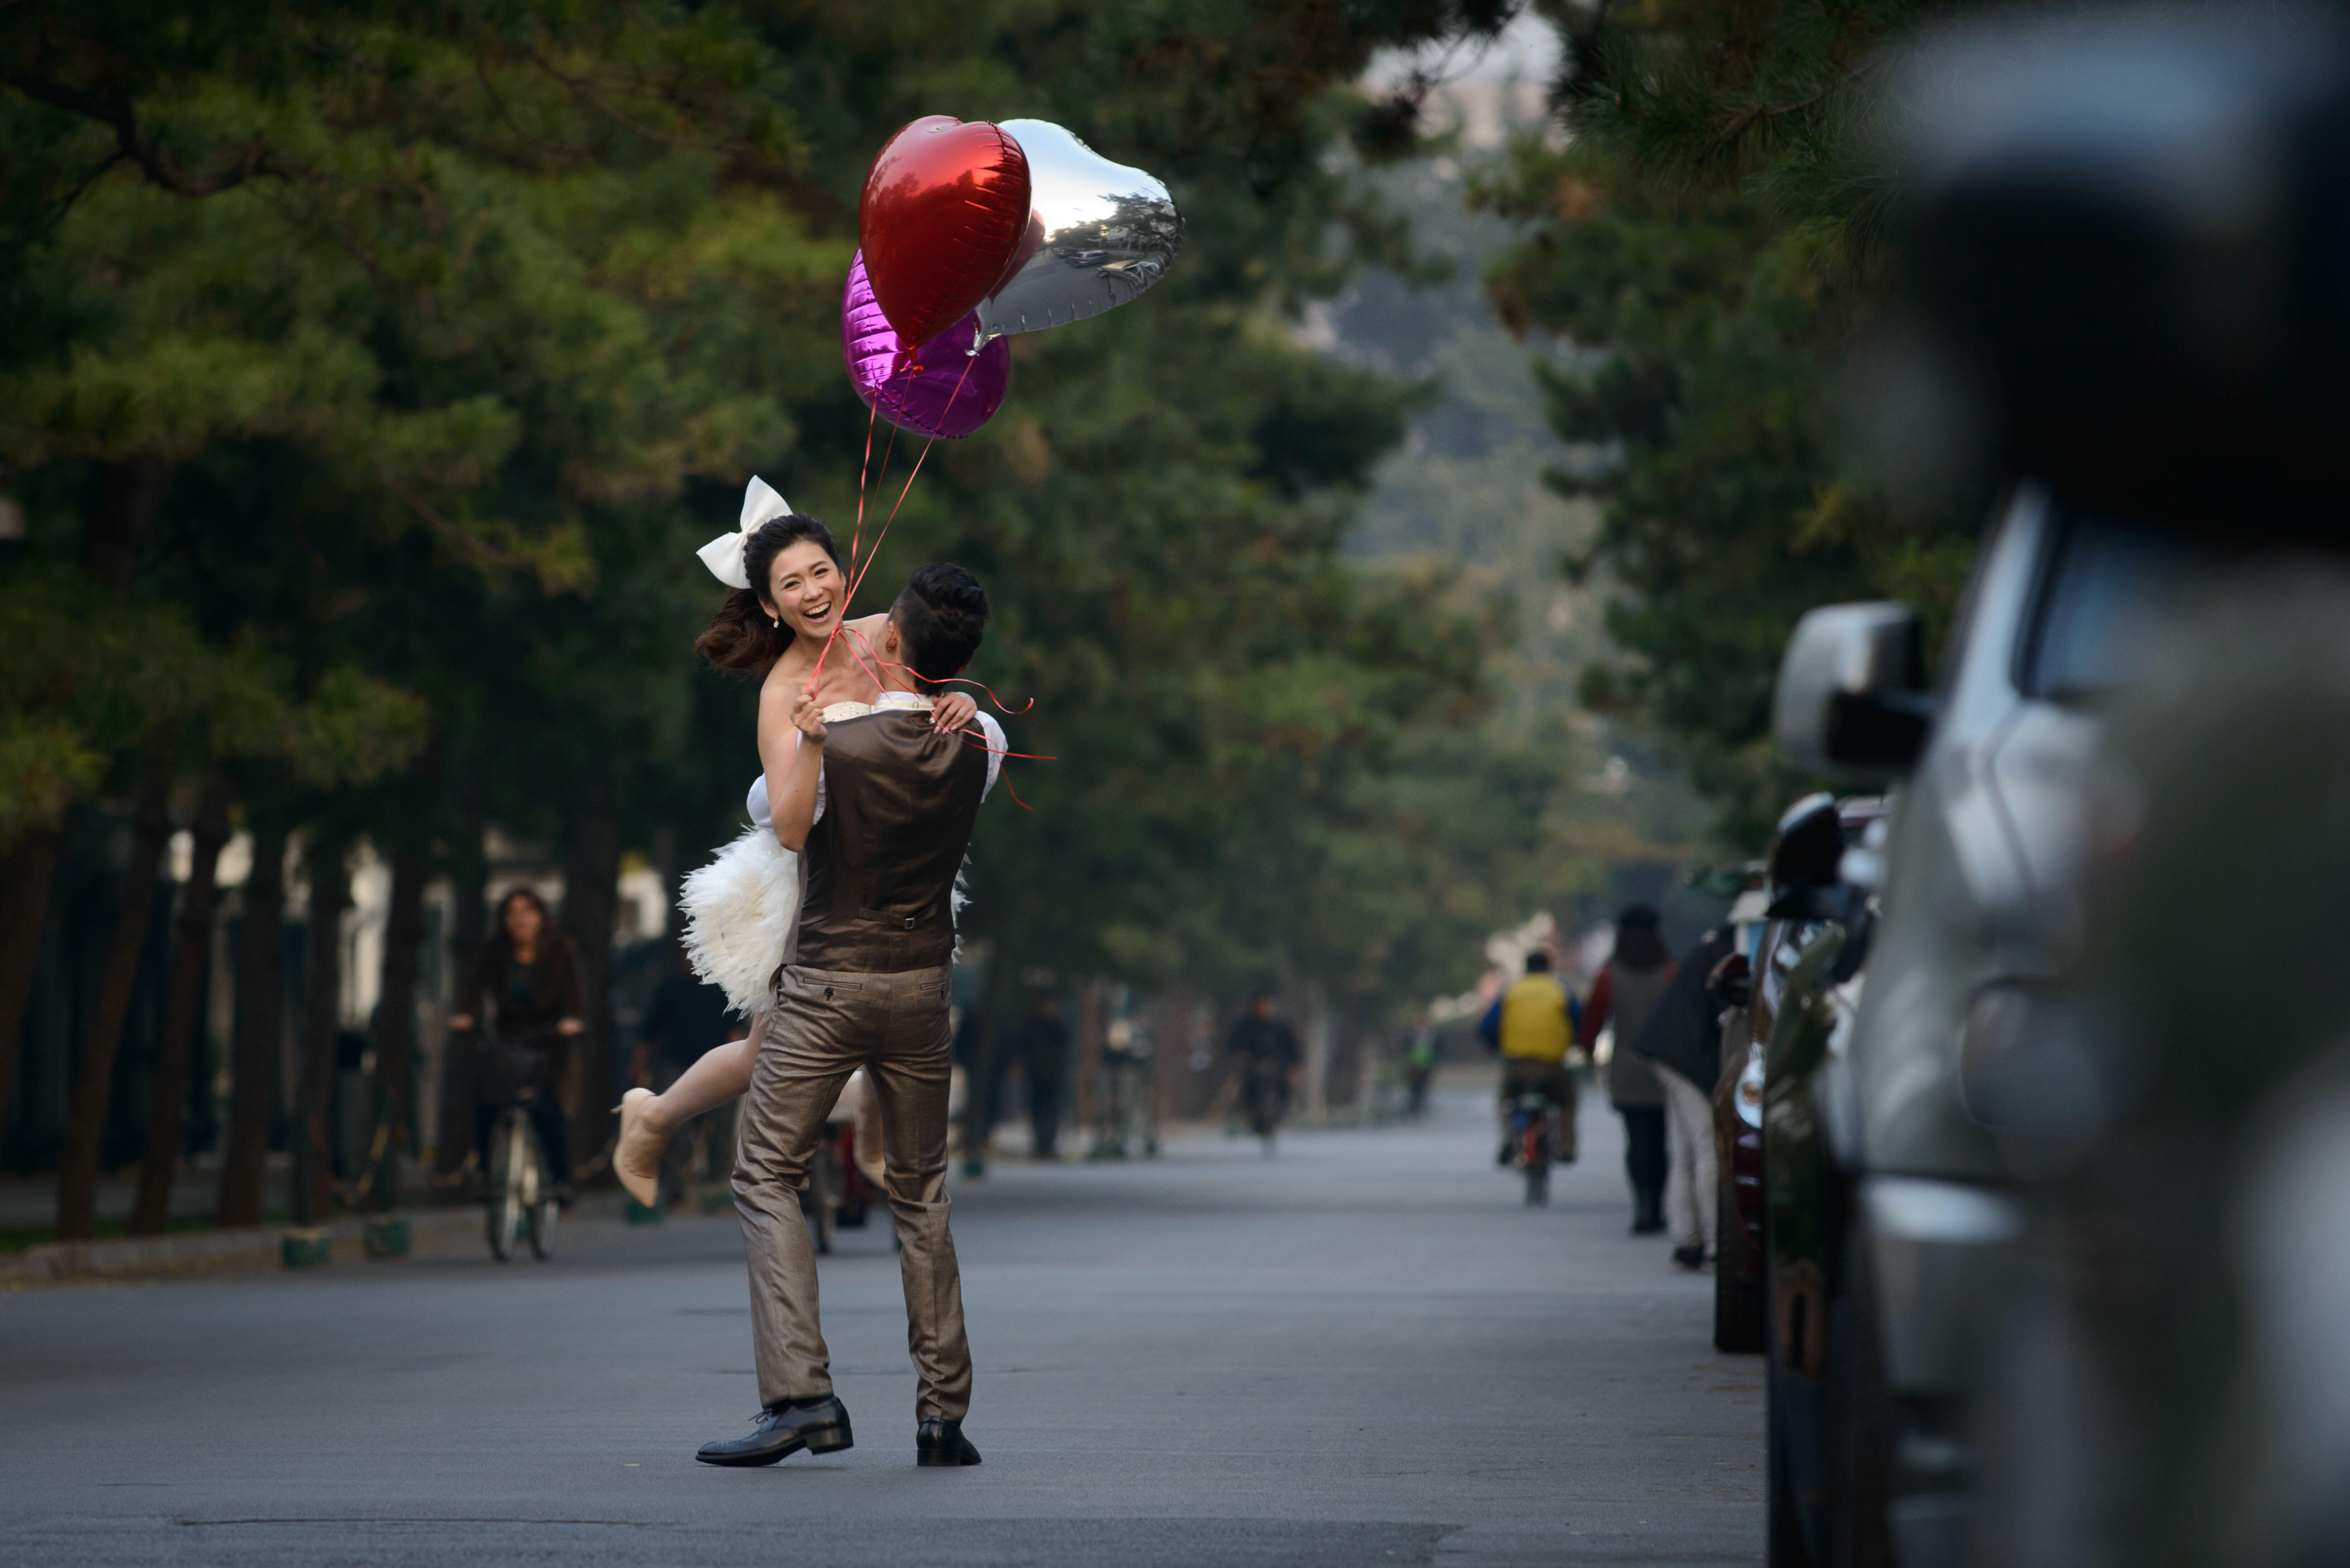 A woman wearing a wedding dress and holding heart-shaped ballons is lifted by a man on a street in Beijing on October 21, 2013. China's gross domestic product expanded 7.8 percent year-on-year in July-September, data showed, snapping two quarters of slowi